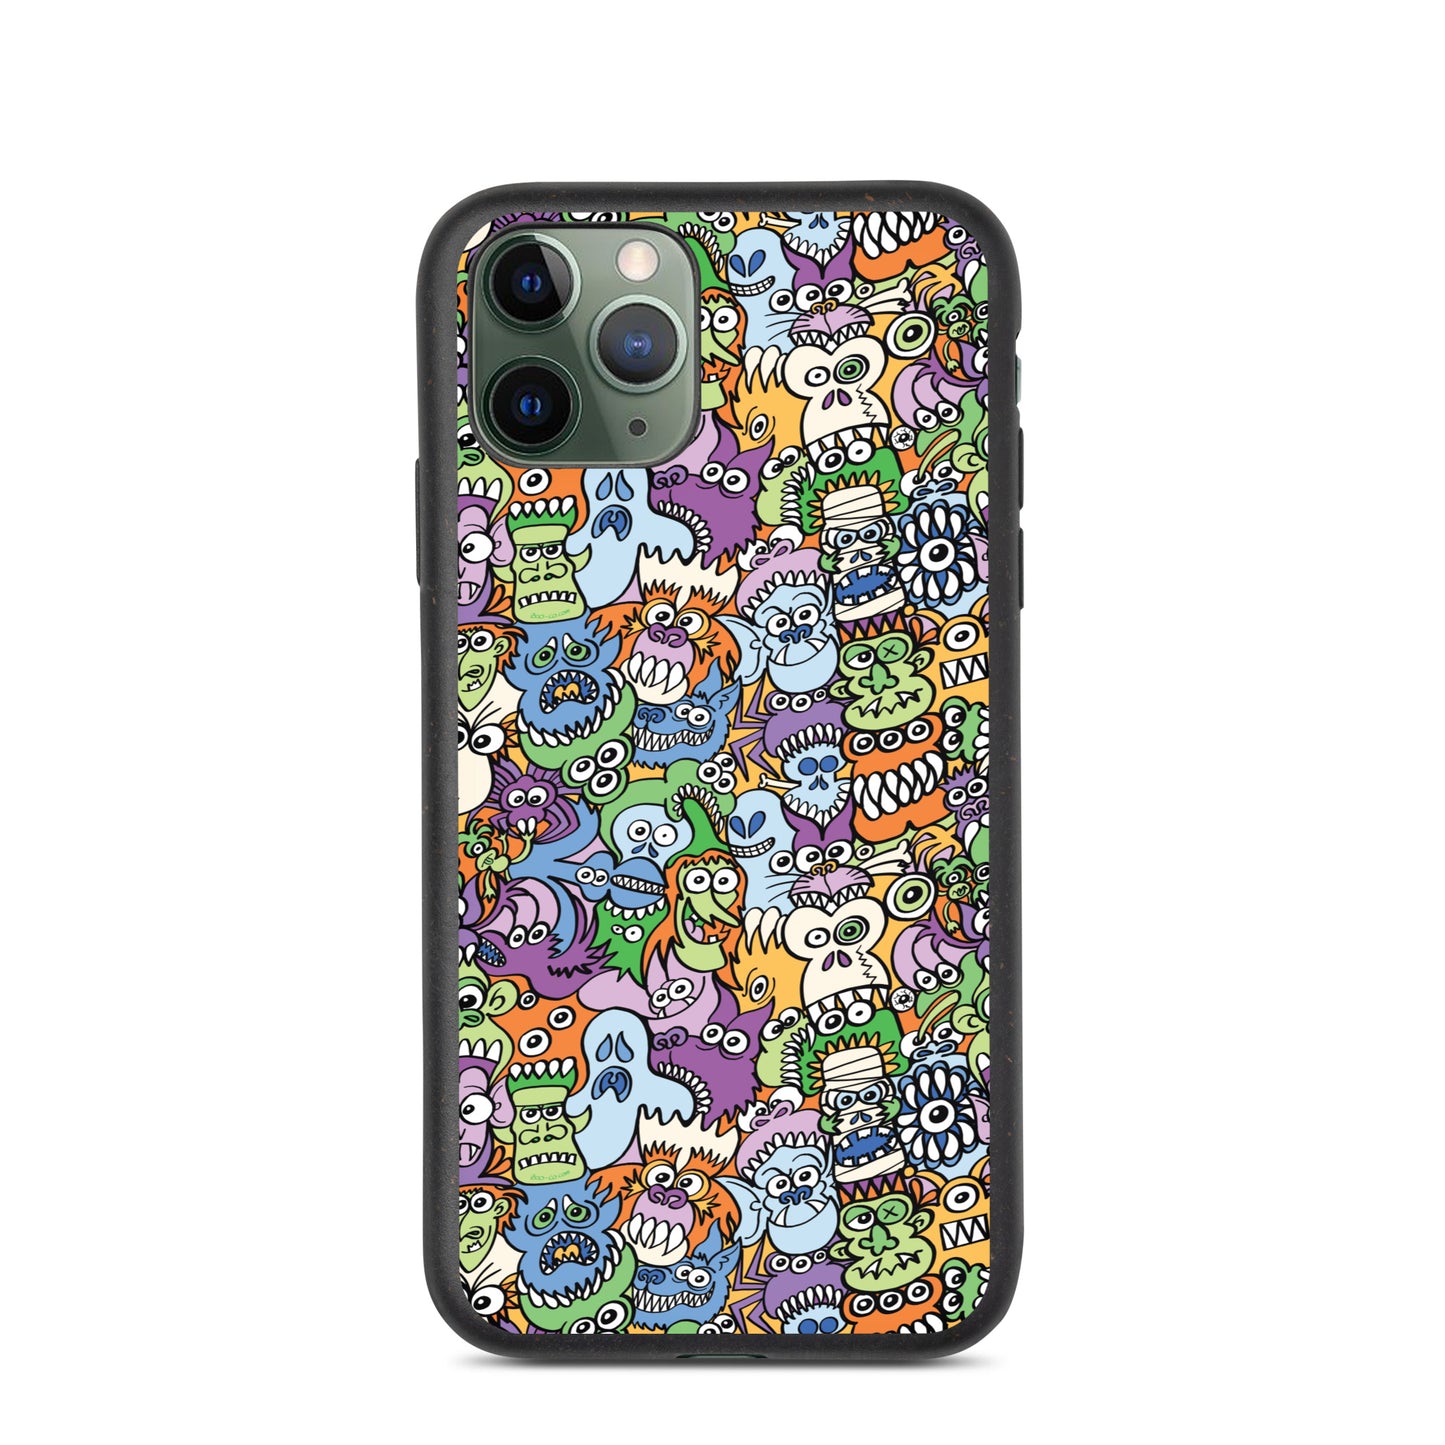 All the spooky Halloween monsters in a pattern design Speckled iPhone case. iphone 11 pro